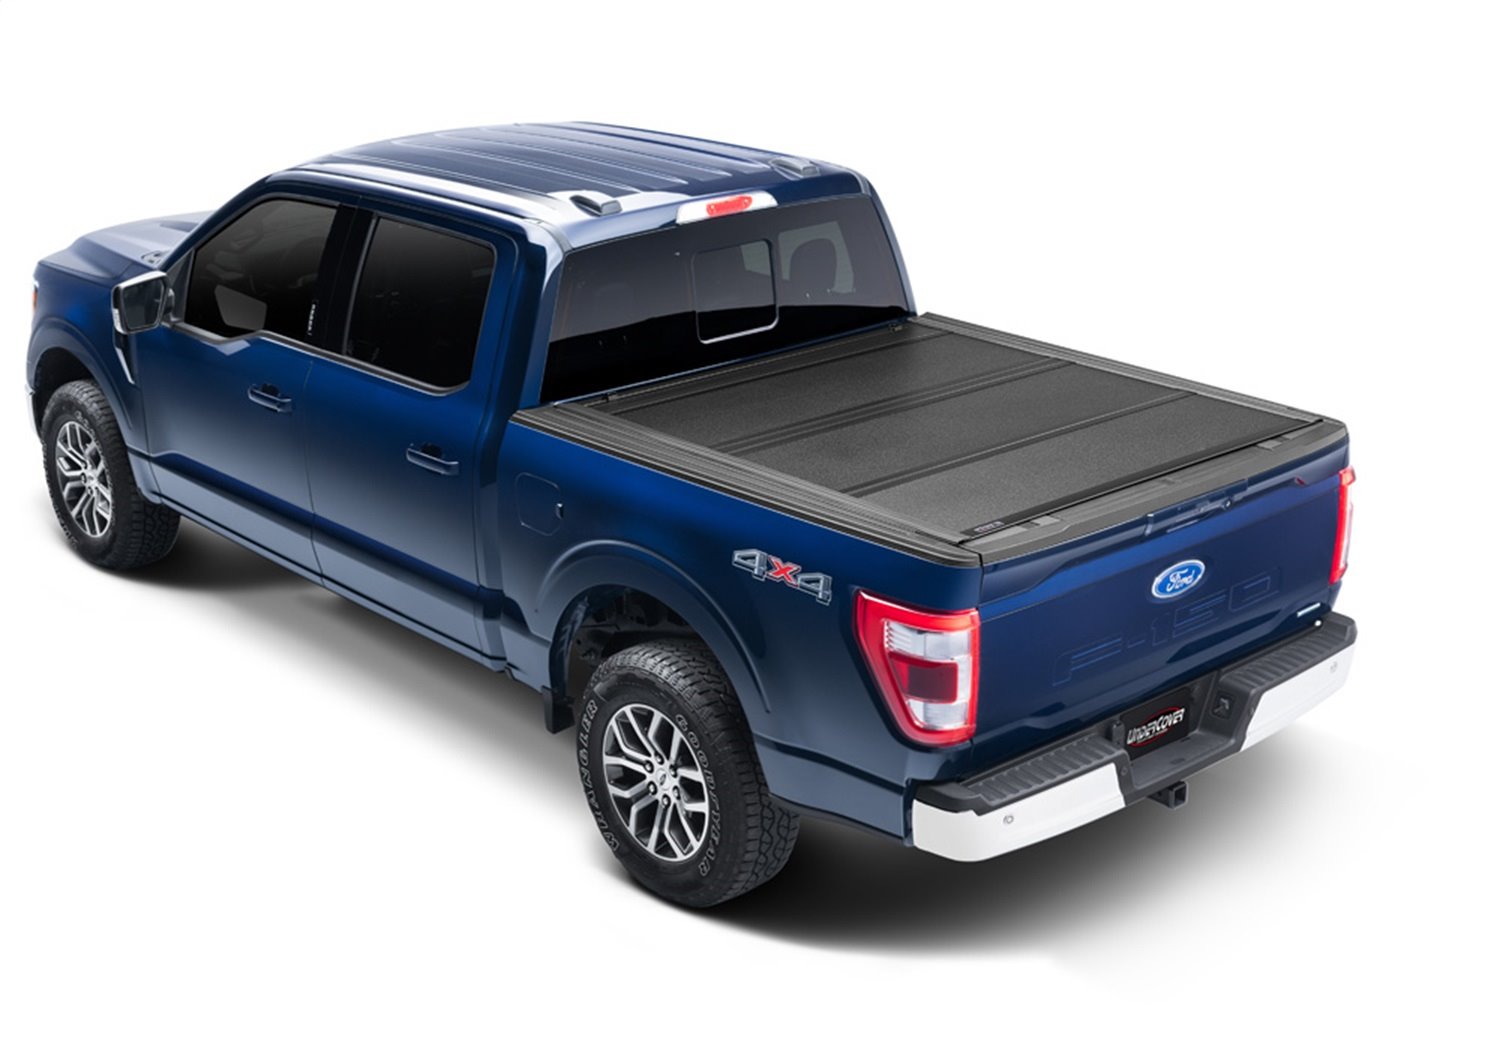 AX22031 Armor Flex Hard Folding Cover, Fits Select Ford F-150 8'2" Bed STD/EXT/Crew, Black Textured